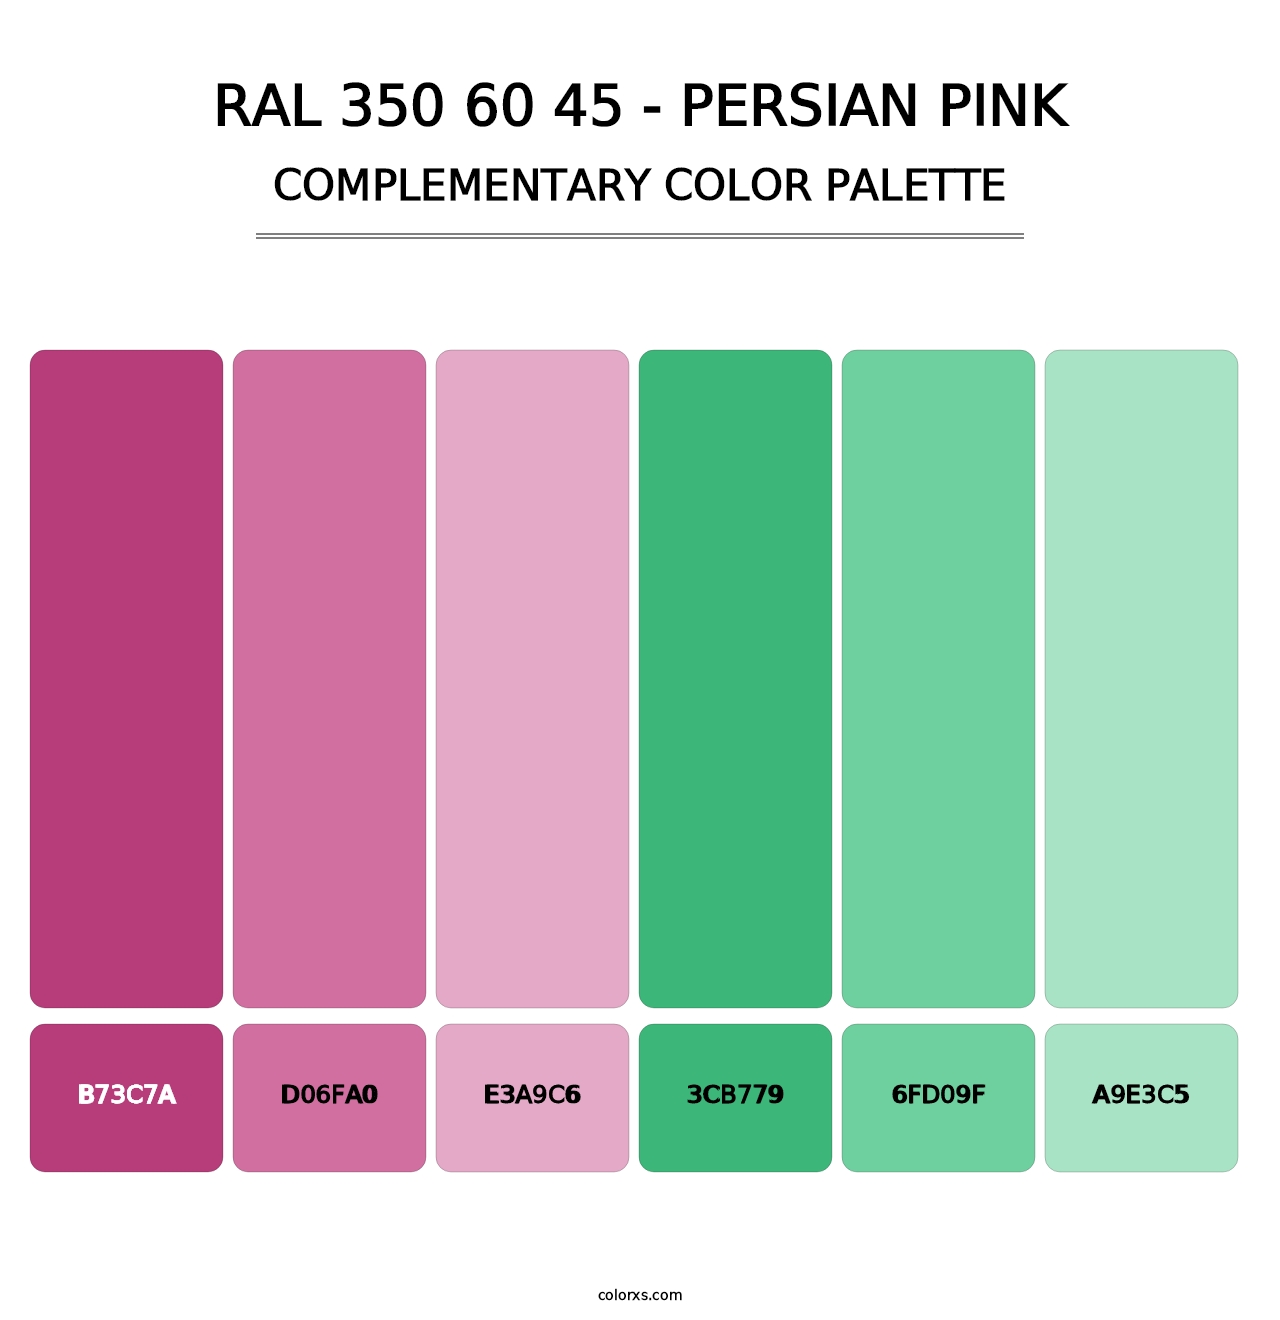 RAL 350 60 45 - Persian Pink - Complementary Color Palette